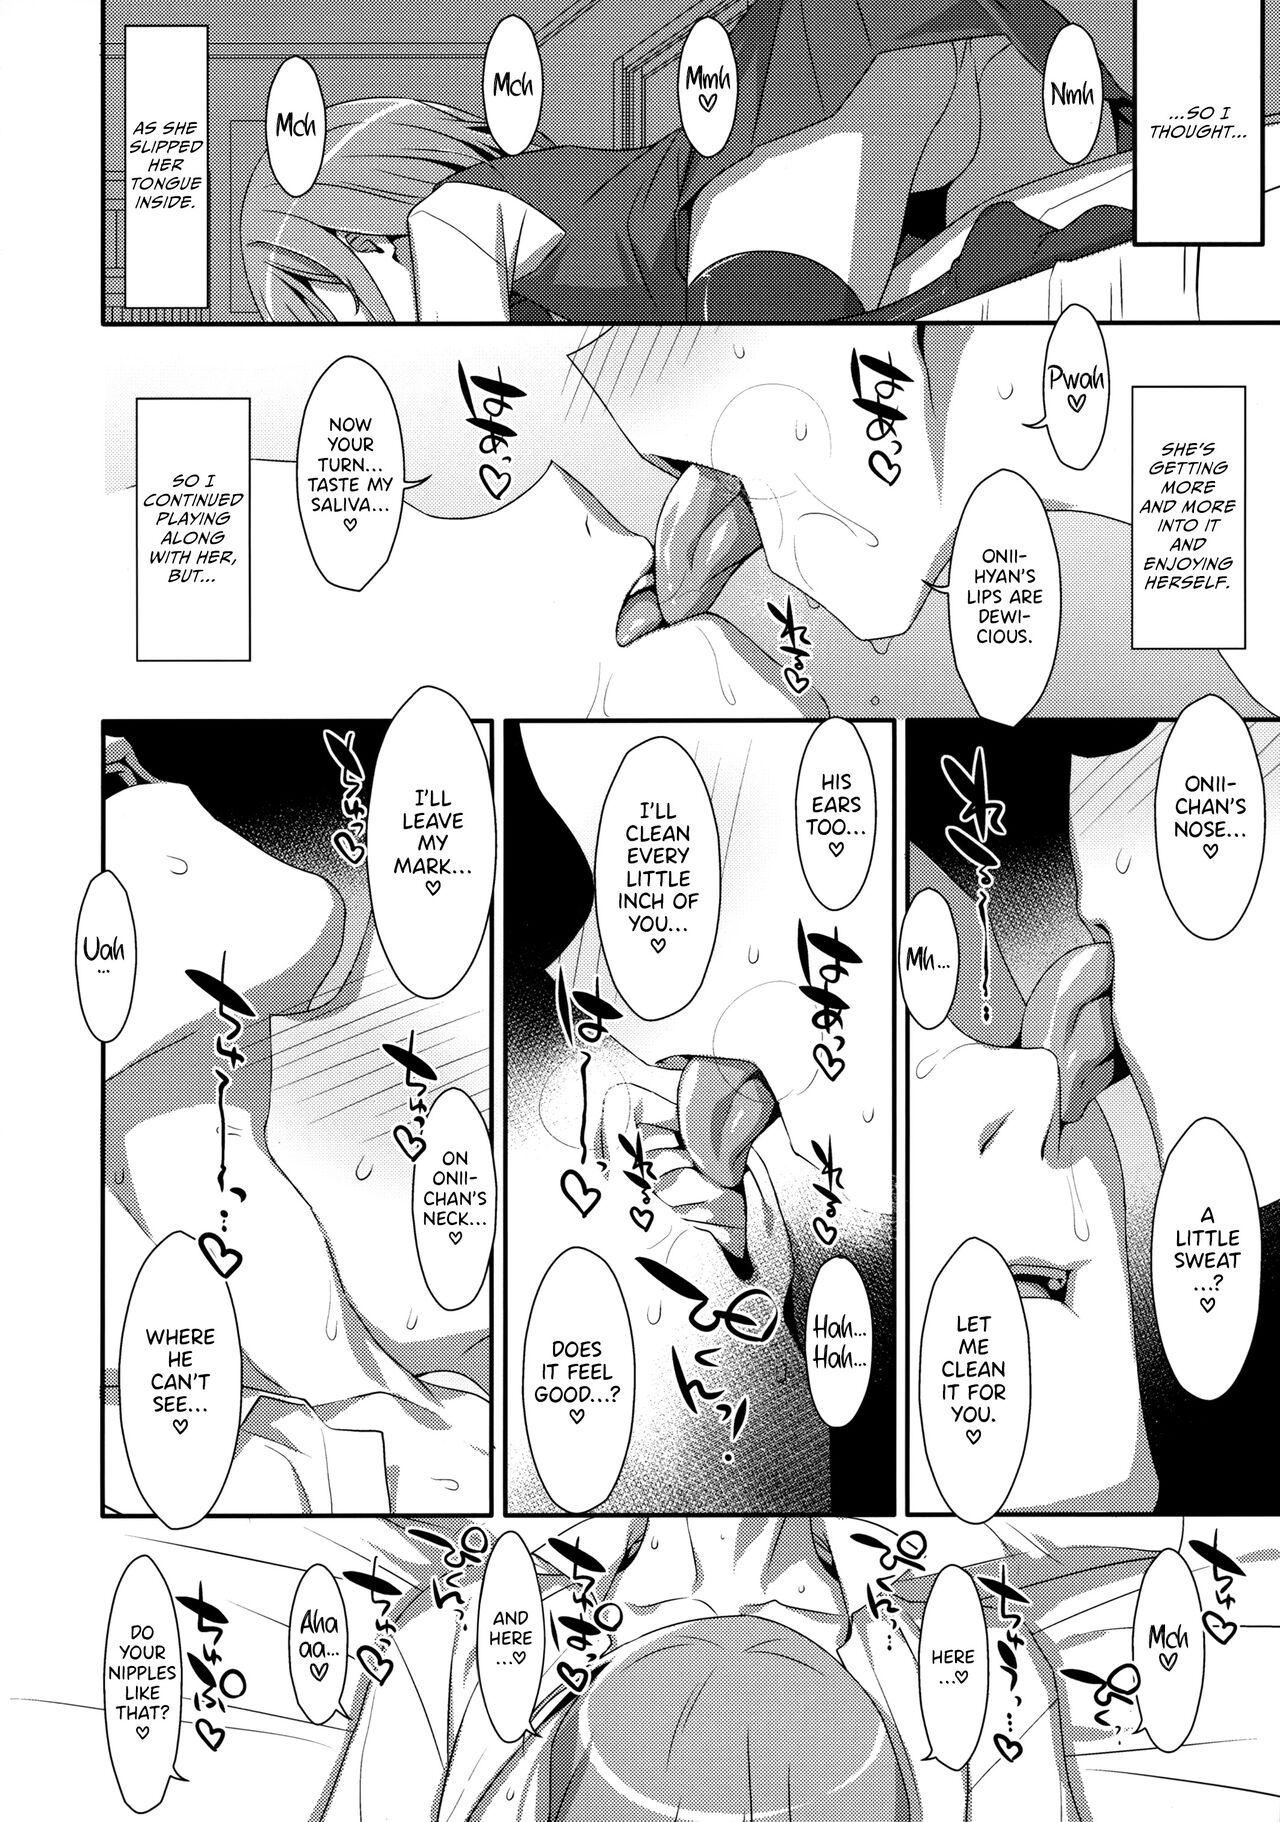 Best Blow Job Ever I Want to Do Lots of Things With My Sleeping Onii-chan! - Original Transexual - Page 6